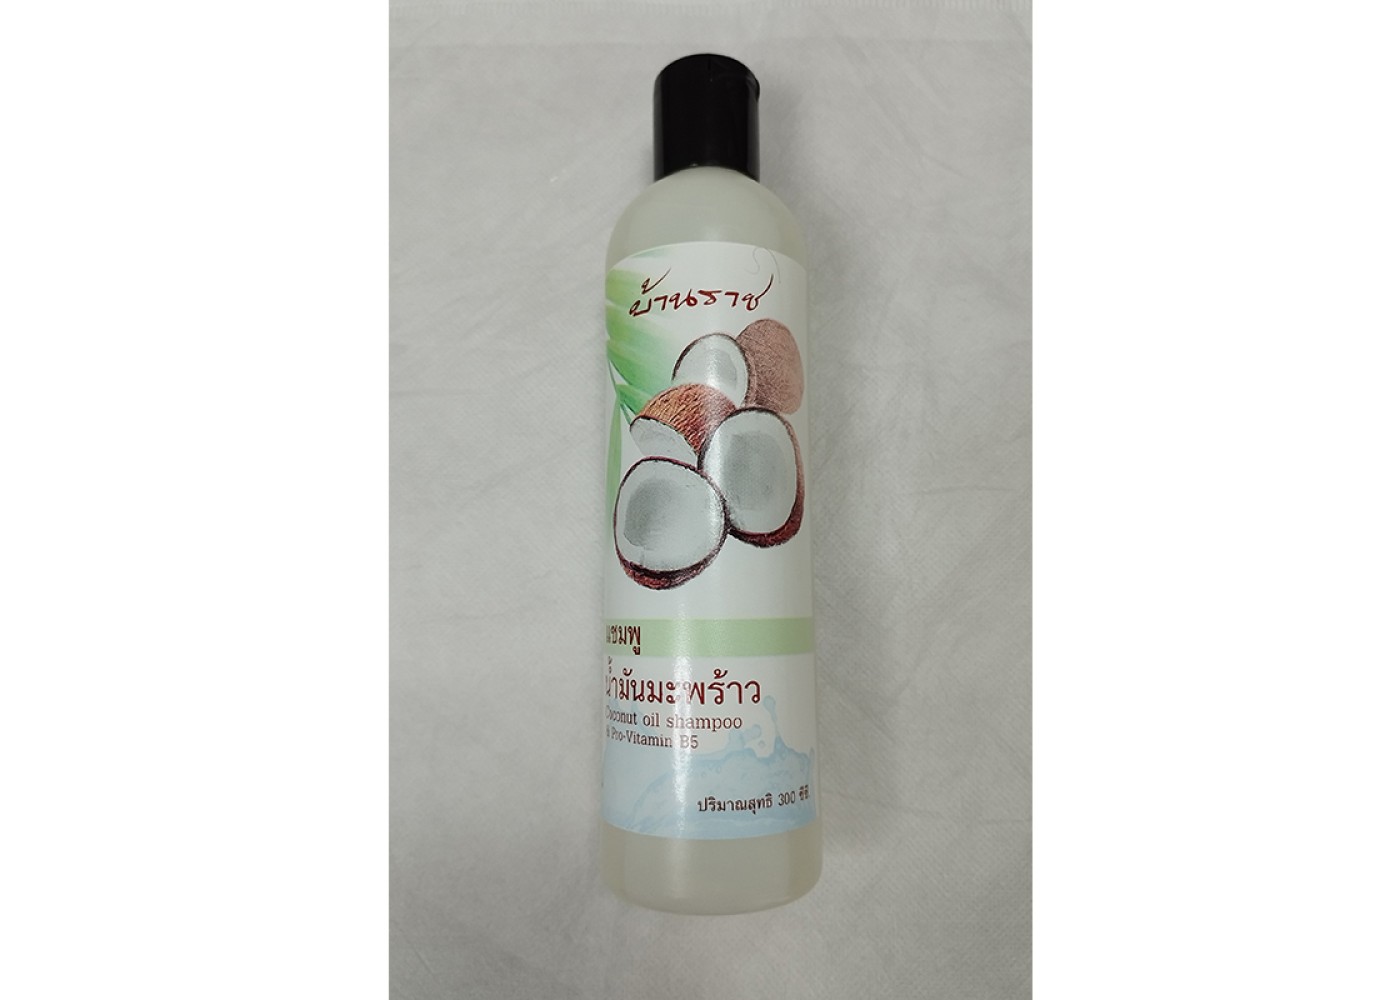 Coconut Oil Shampoo, Gentle Formula, Enriched with Vitamin E, Helps Hydrate the Hair. 300 CC